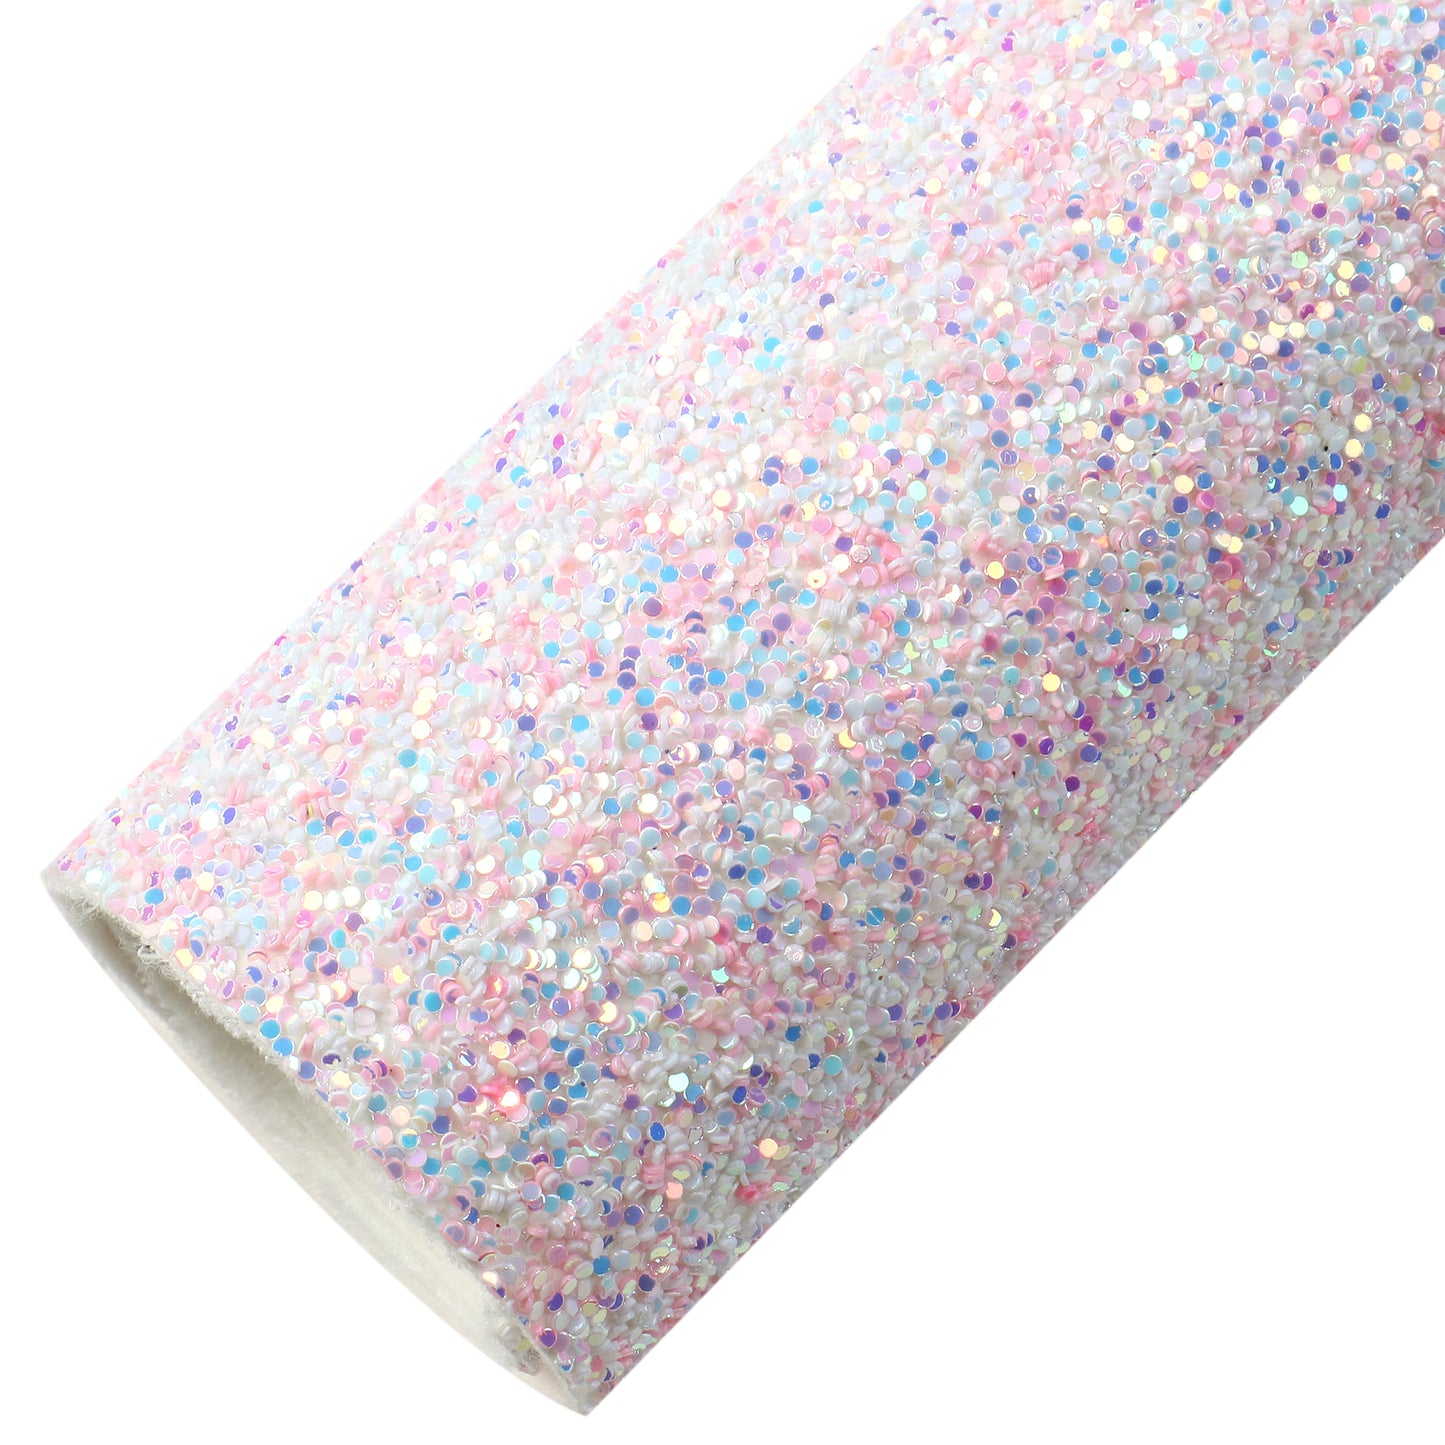 Chunky Glitter Round Sequins Faux Leather Sheets Wholesale